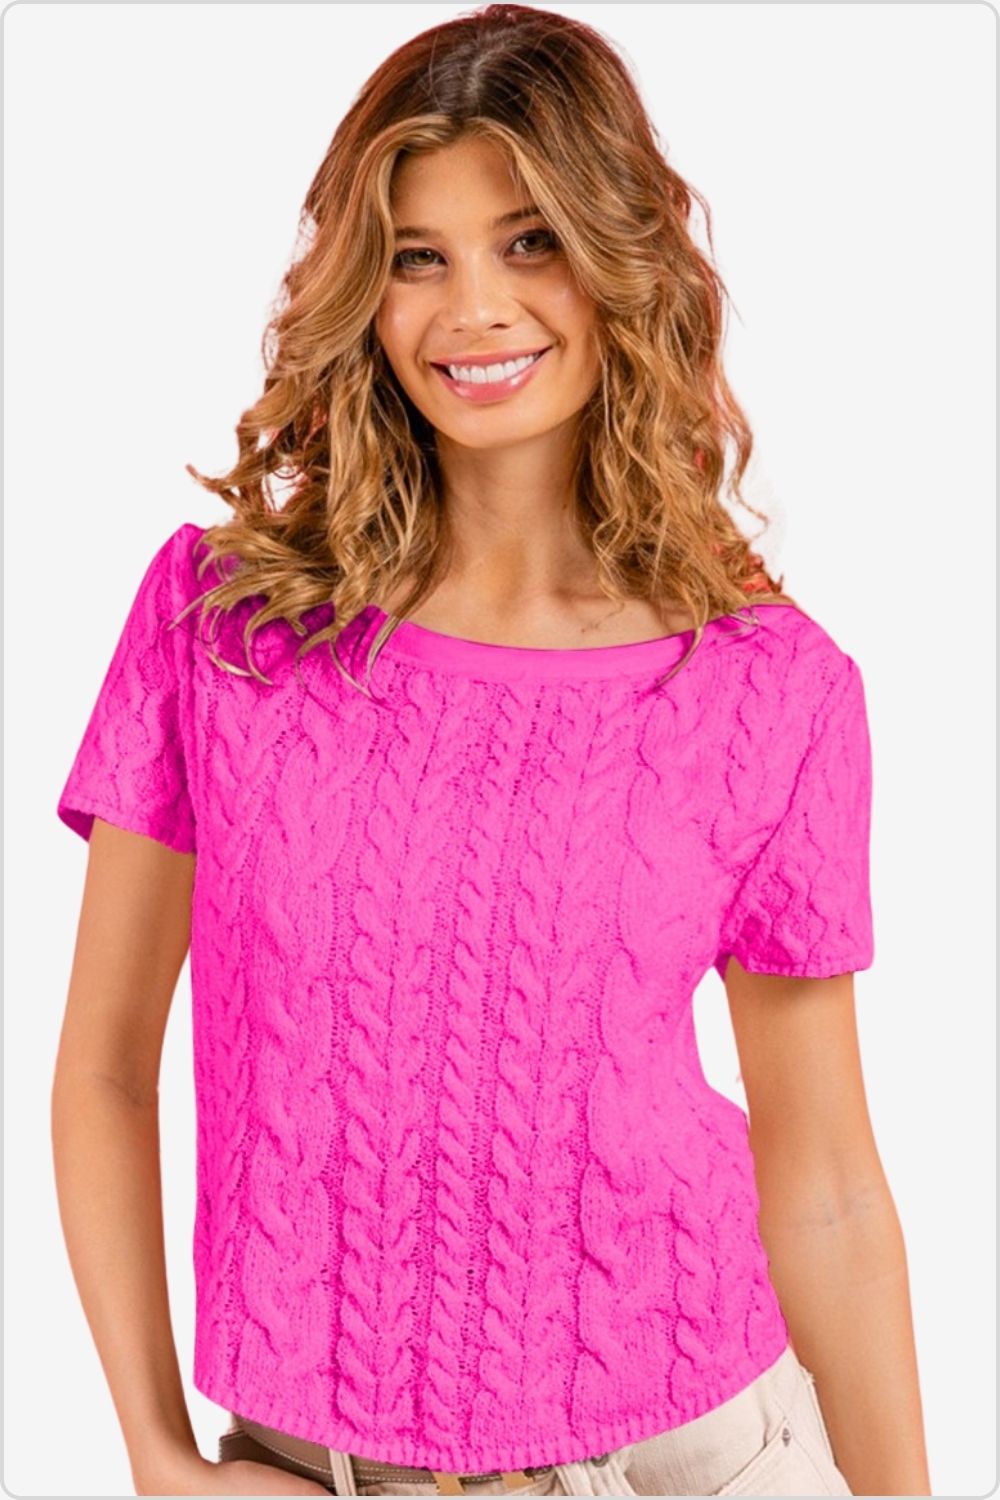 Cheerful woman modeling a vibrant pink short-sleeved cable knit top